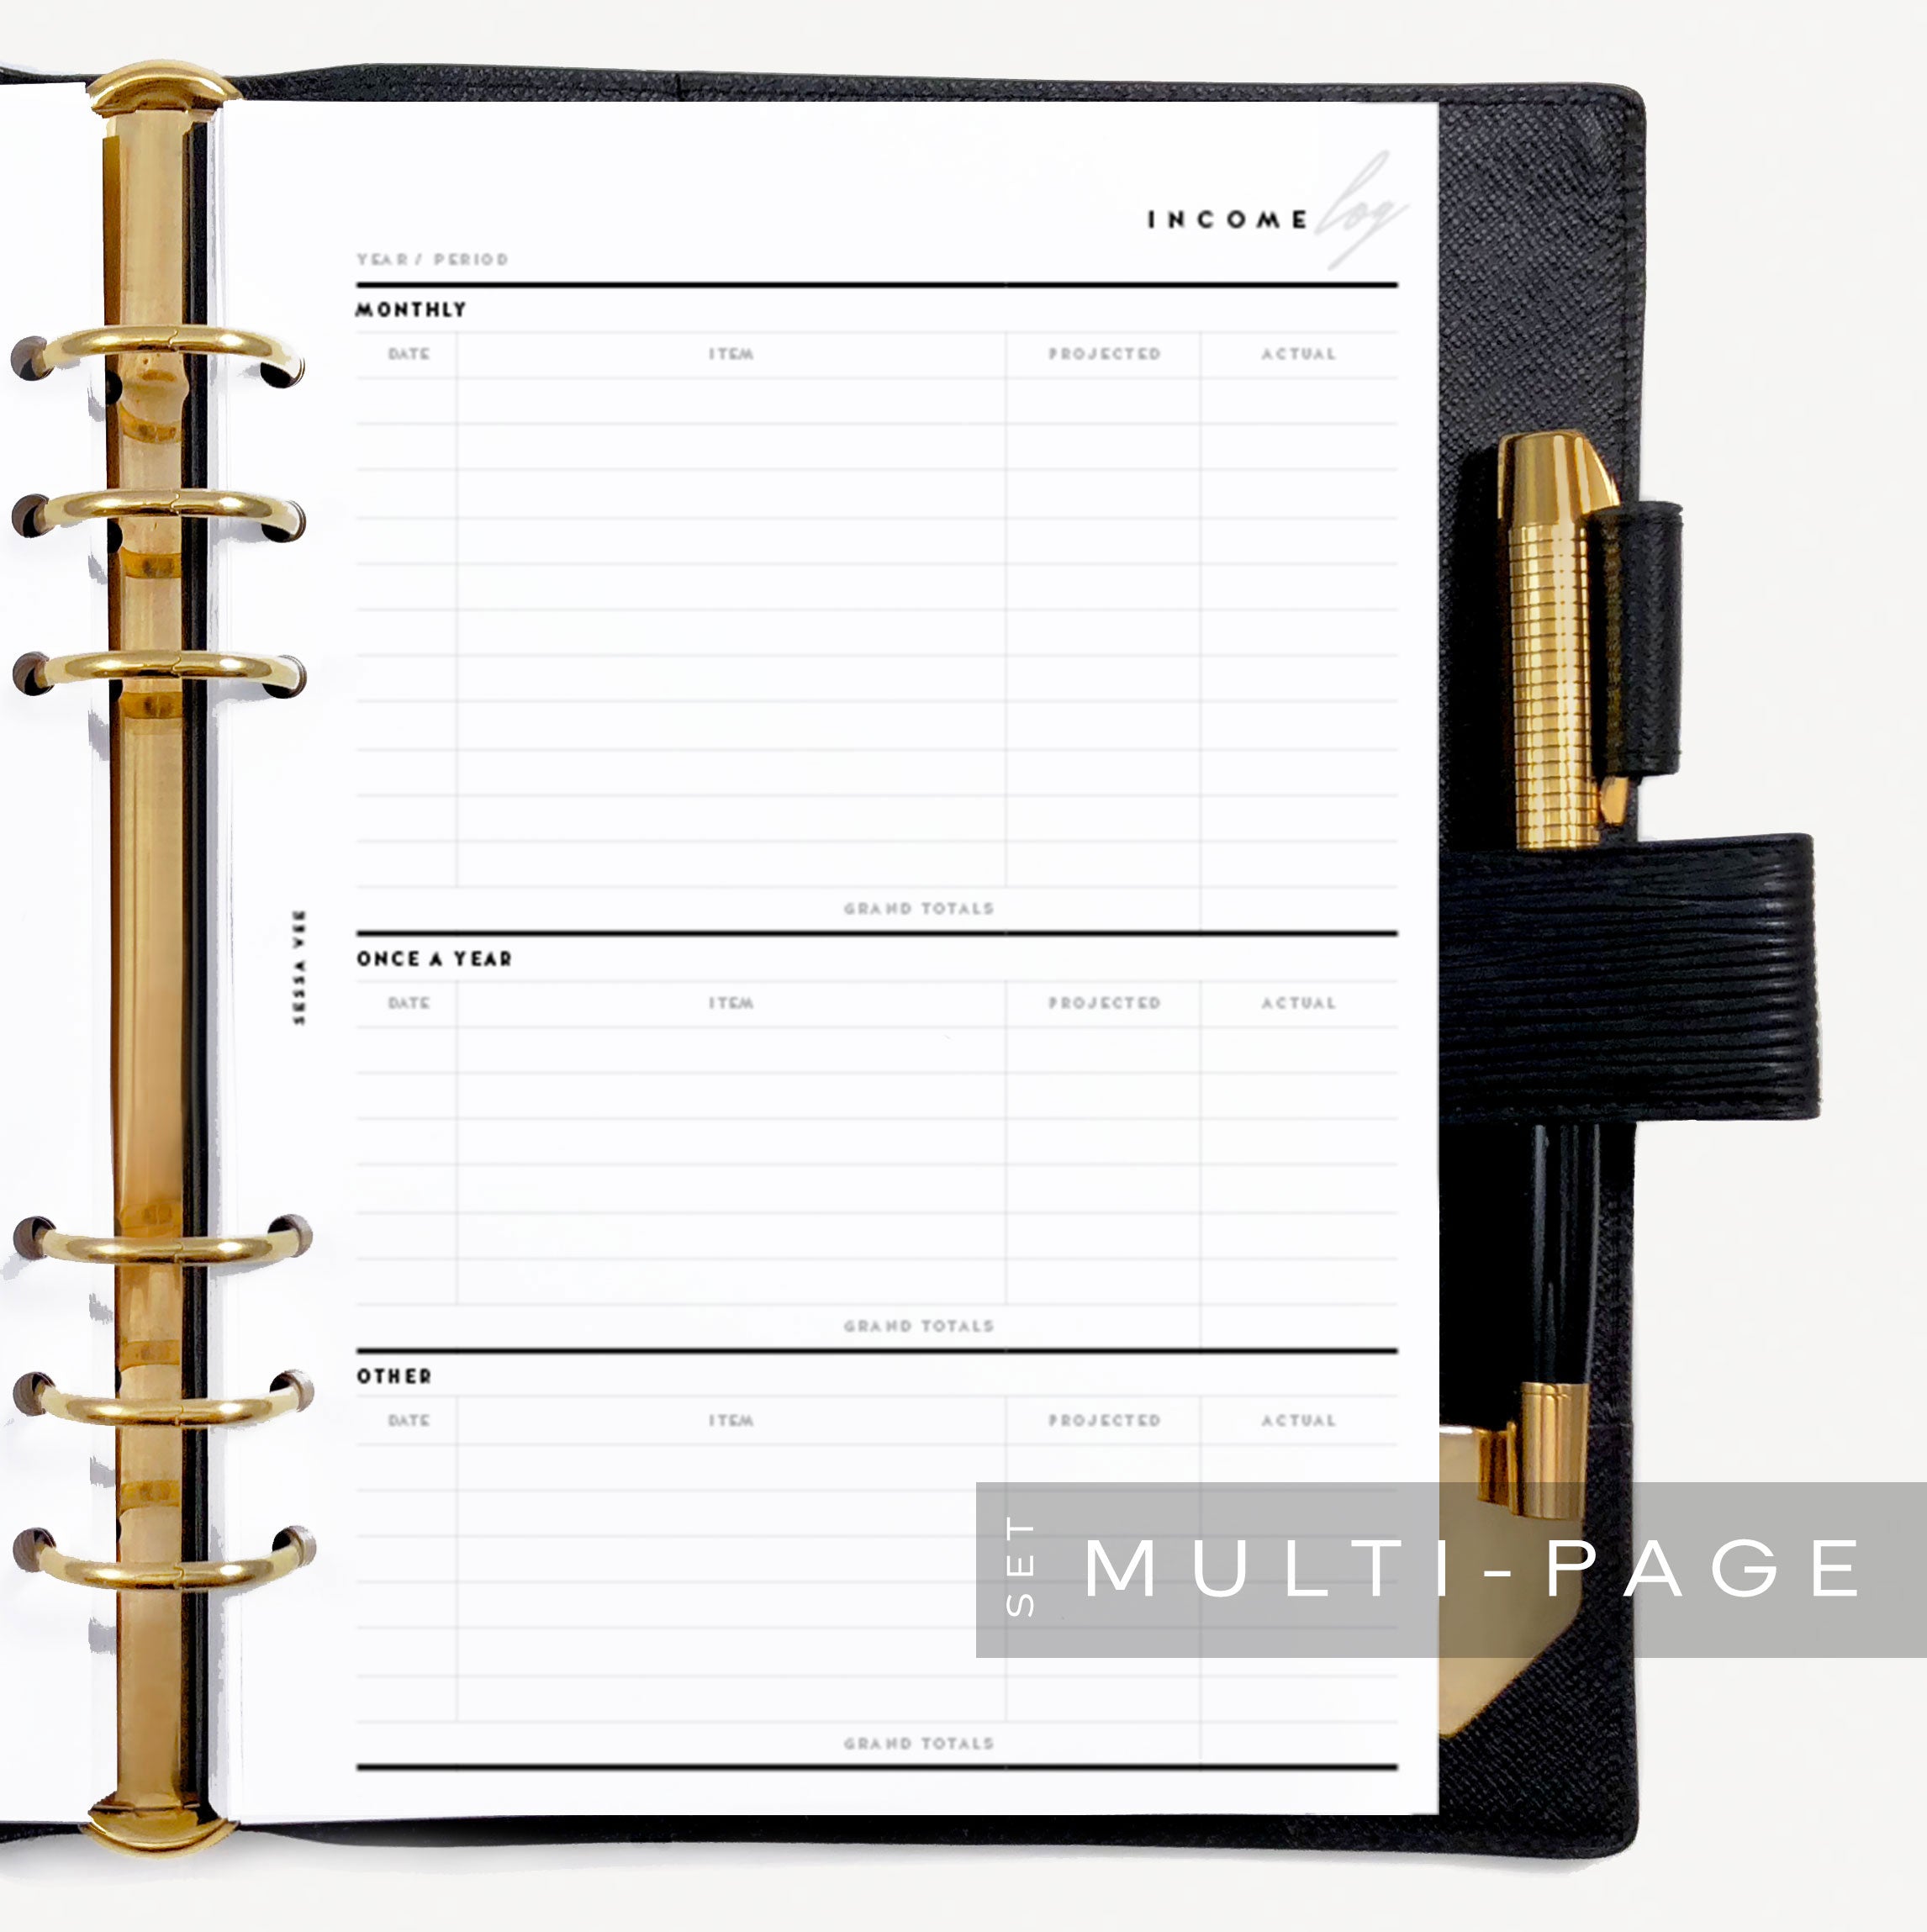 A5 SAVINGS TRACKER planner inserts | Budget finance inserts | savings  tracker | budget planner | finance planner refill for A5 planner